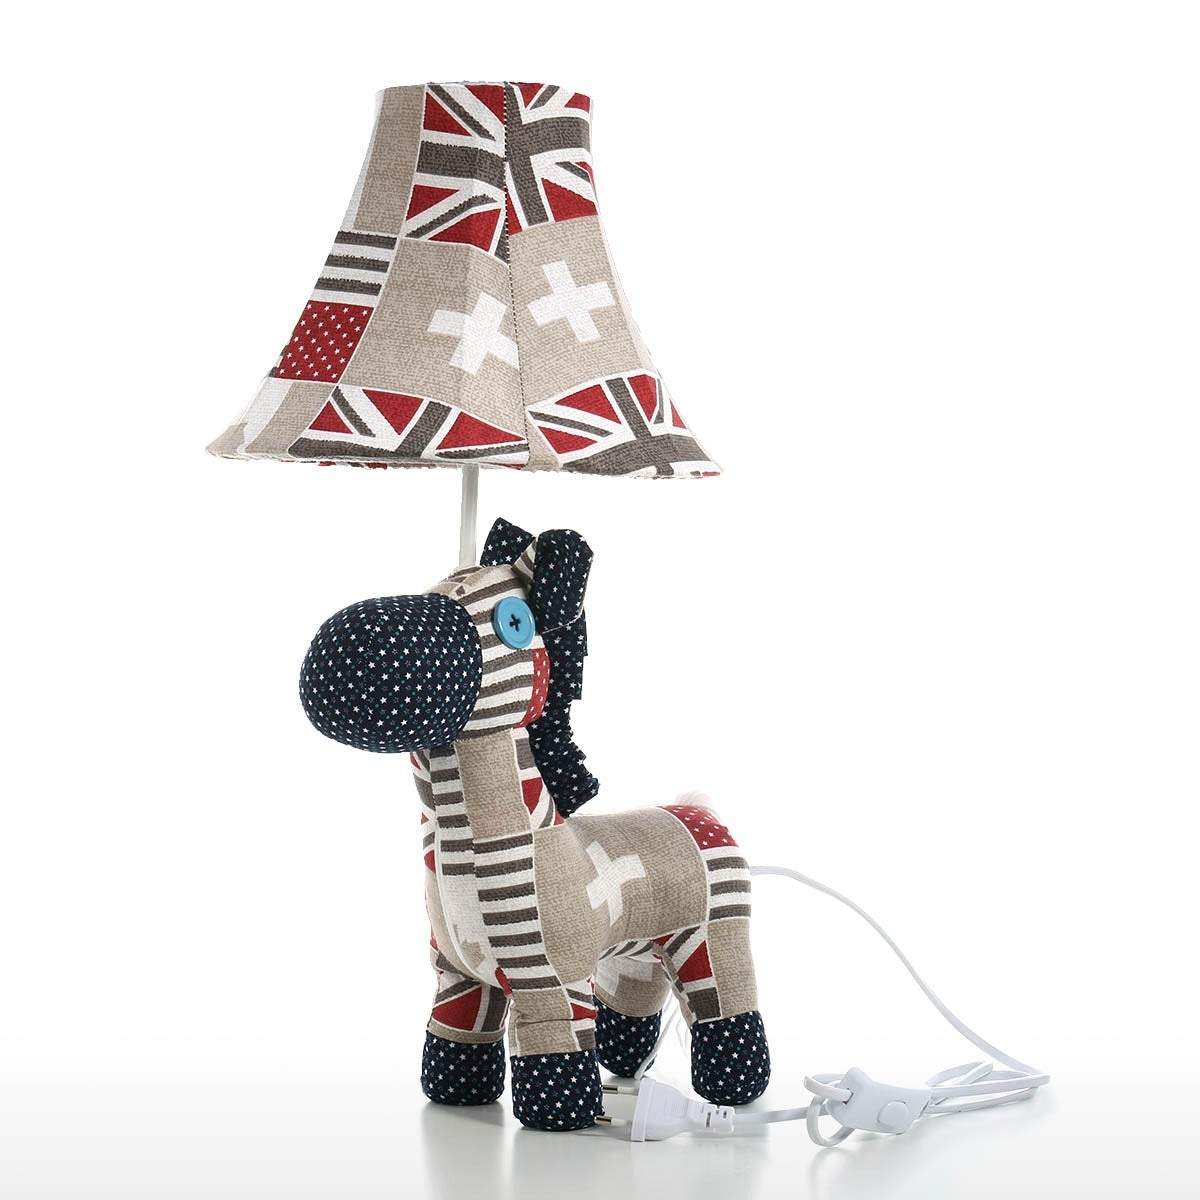 Gifts for Horse Lovers and Horse Gifts with Colorful Nursery Table Lamp and Nursery Desk Lamp